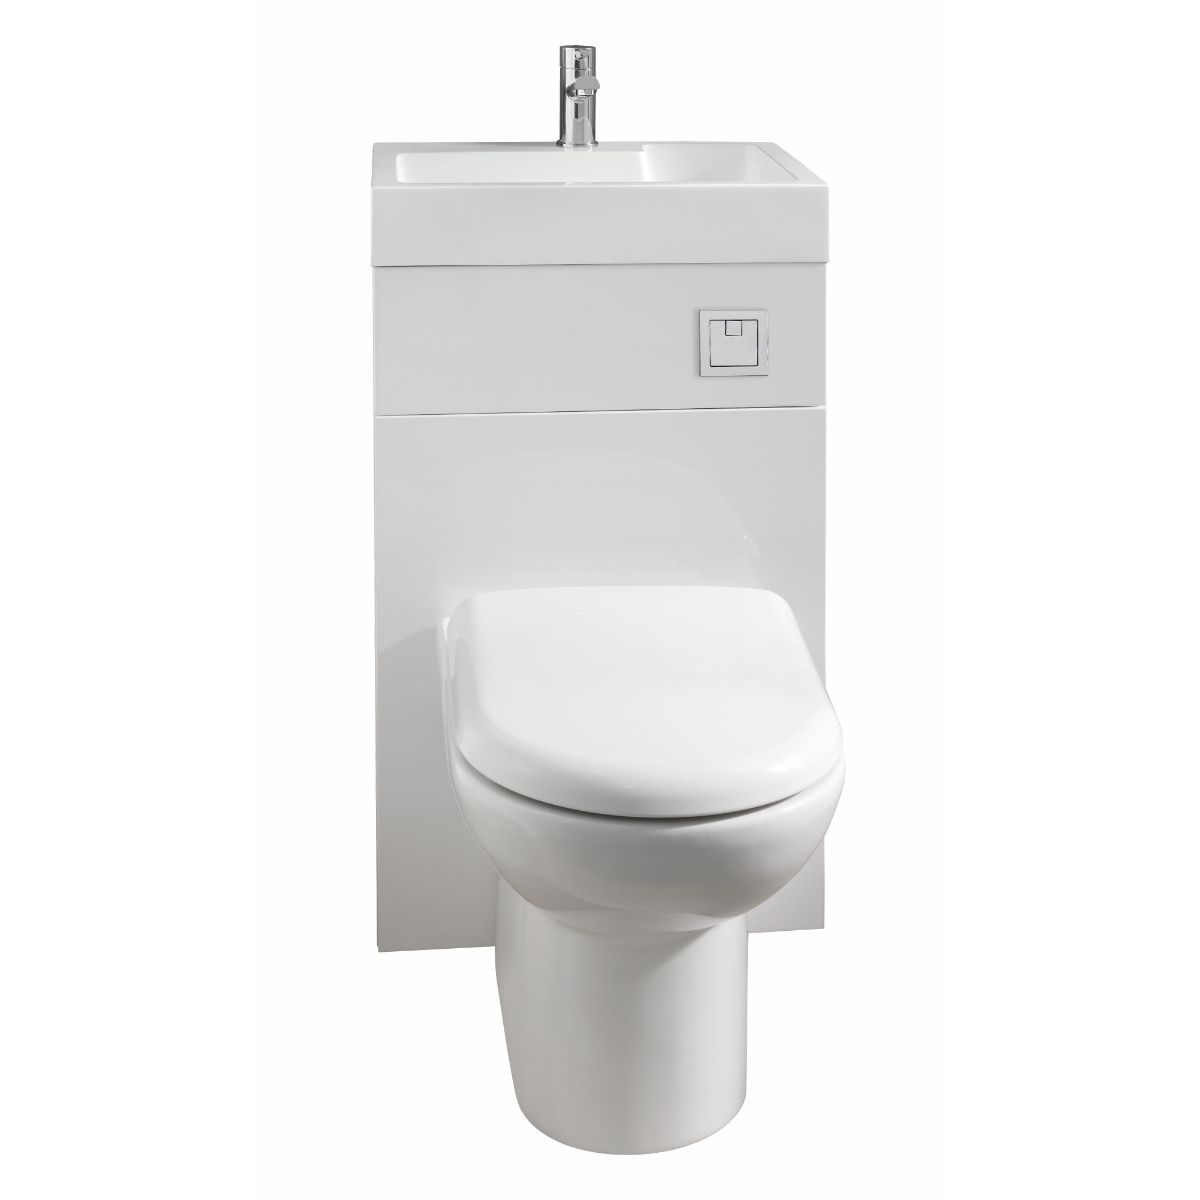 500mm Aquariss Absolute White Back to Wall Toilet Unit